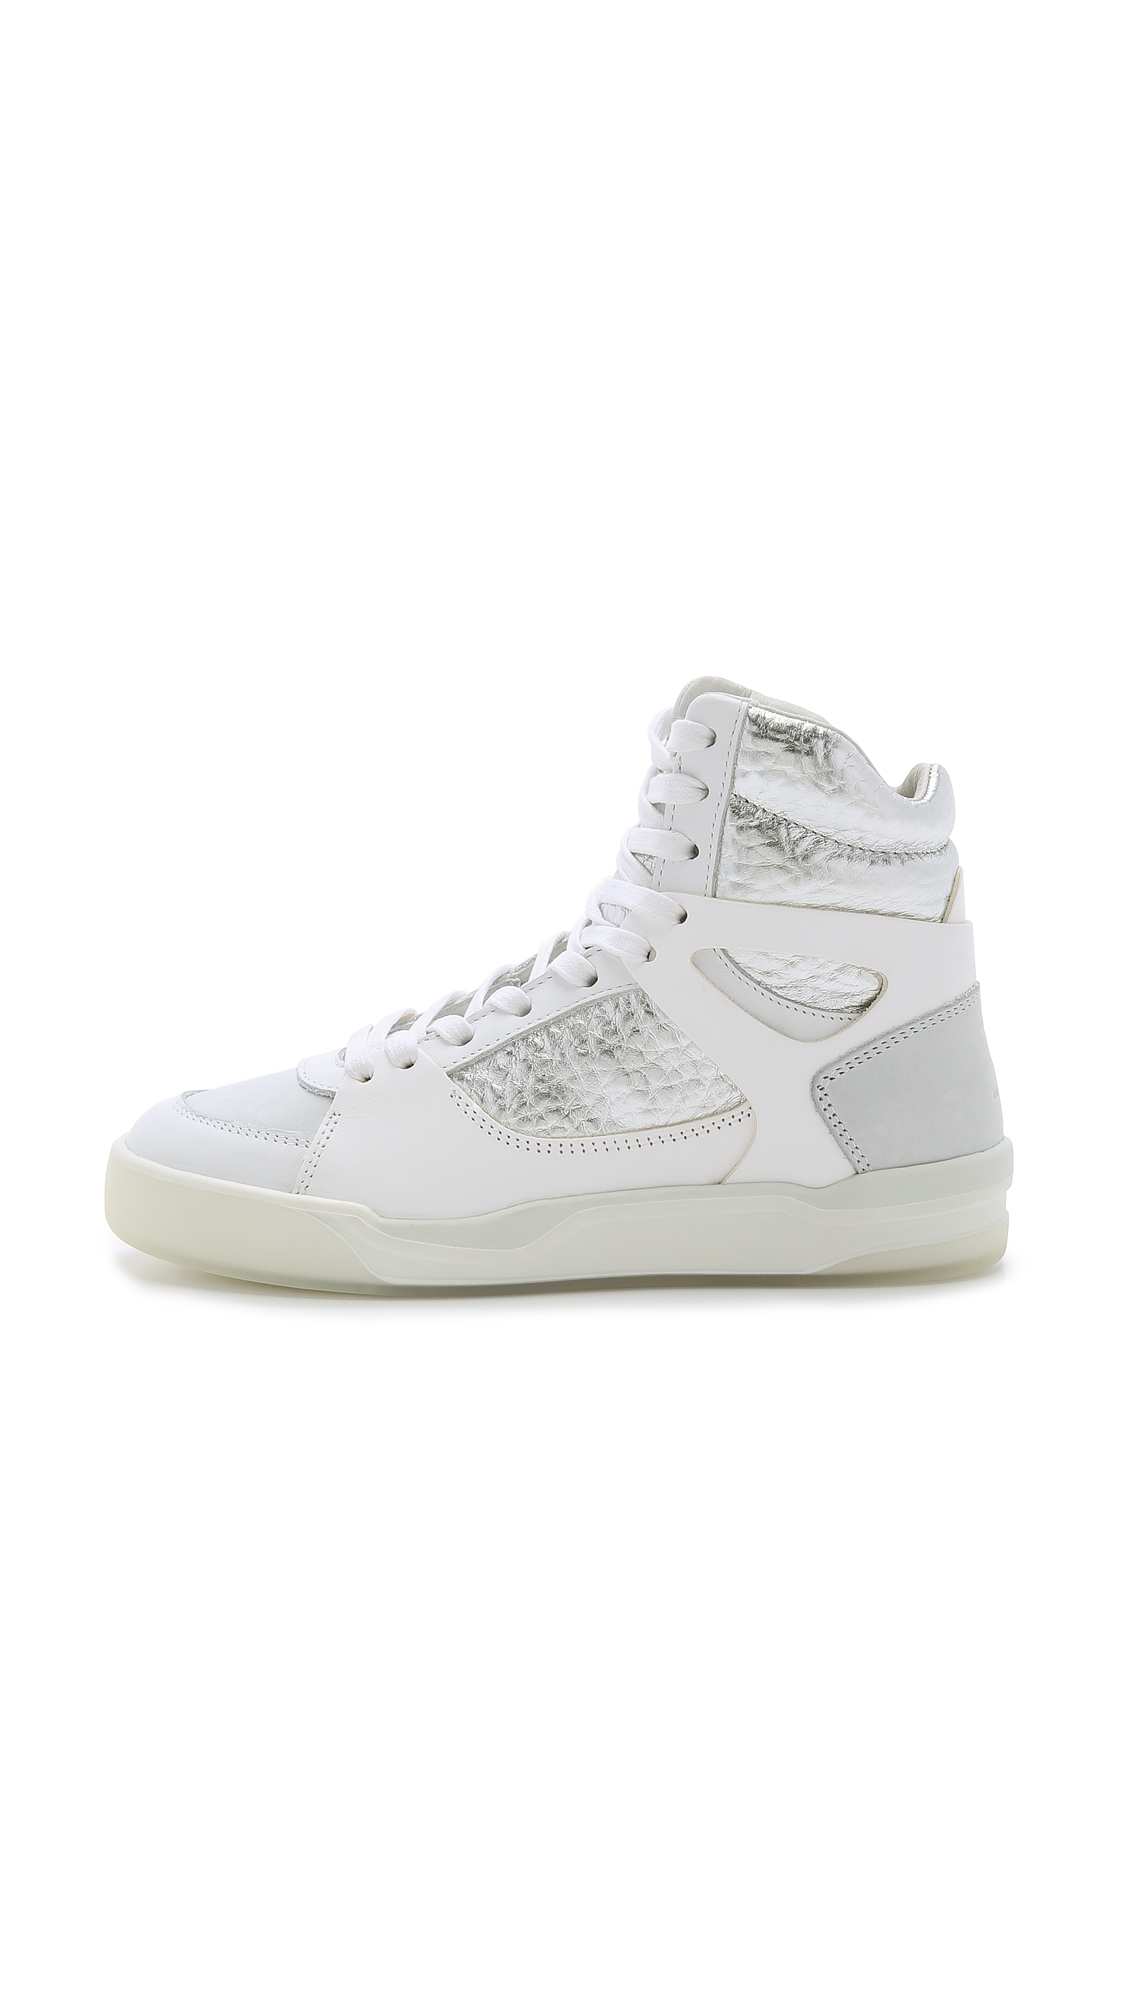 Lyst - Puma Mcq Move Femme High Top Sneakers - White/silver in White